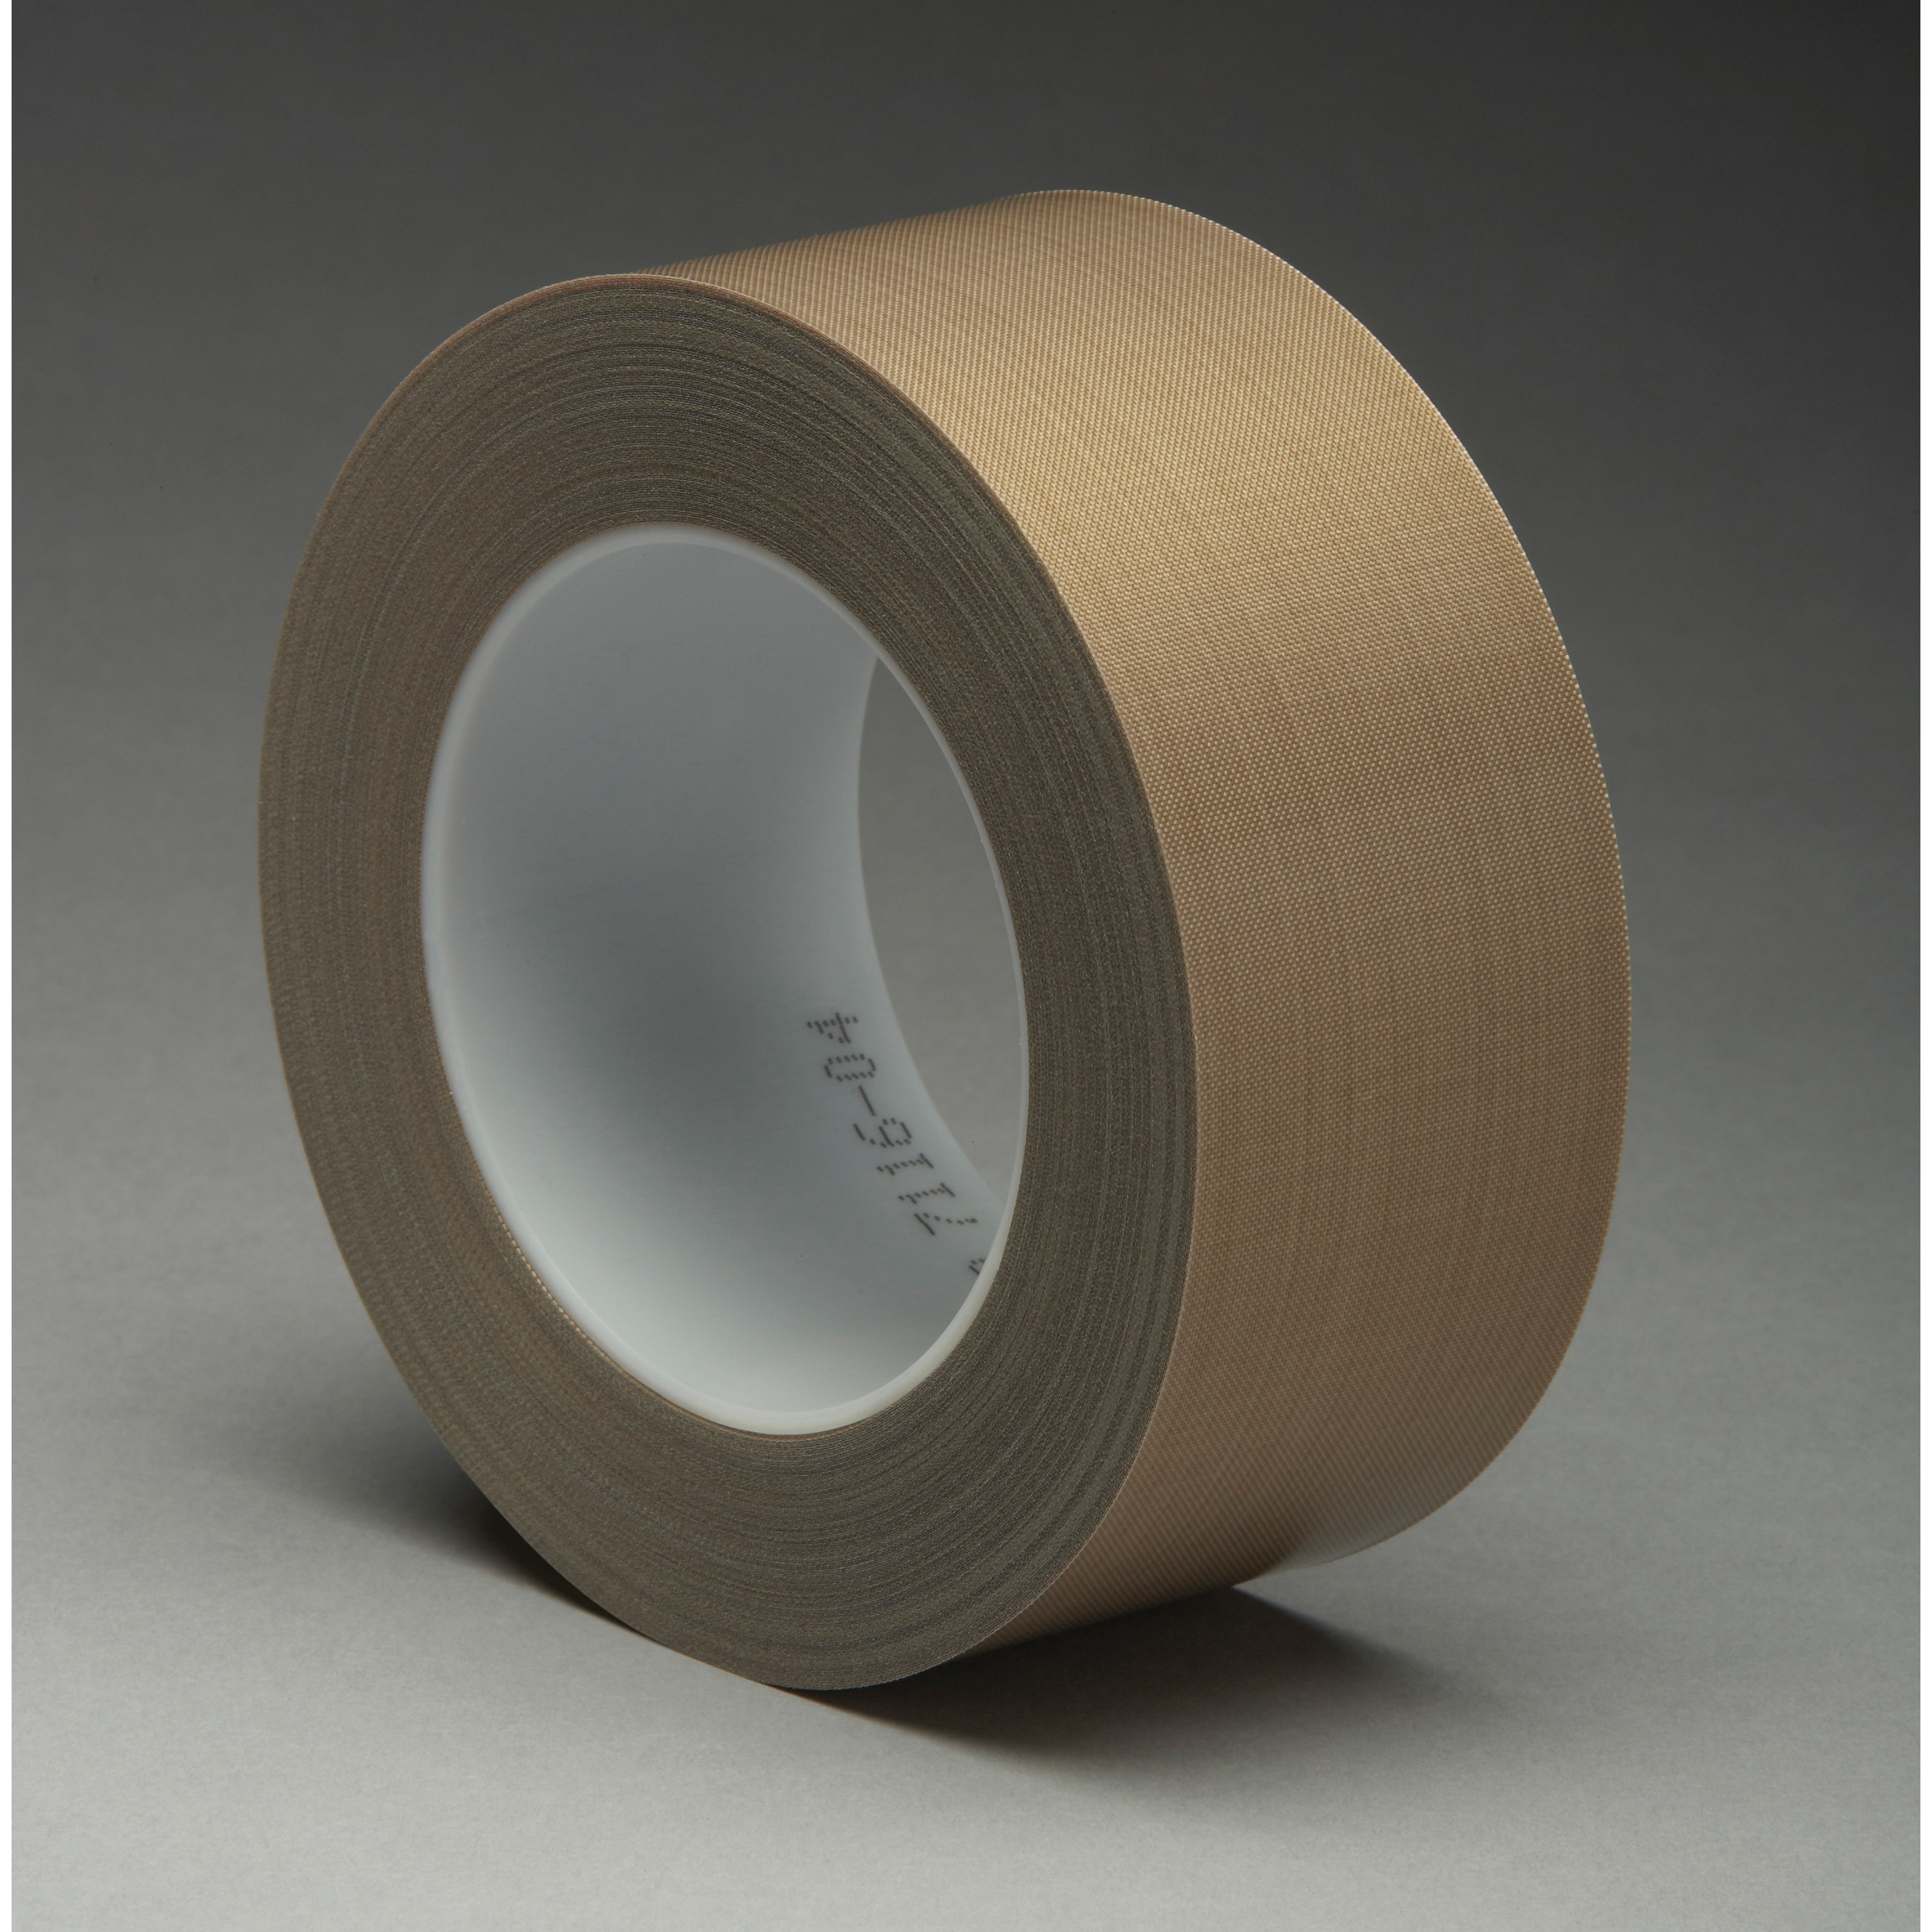 3M™ 021200-16163 Pressure Sensitive Glass Cloth Tape, 36 yd L x 3 in W, 8.2 mil THK, Silicon Adhesive, Woven Glass Cloth Impregnated with PTFE Backing, Brown